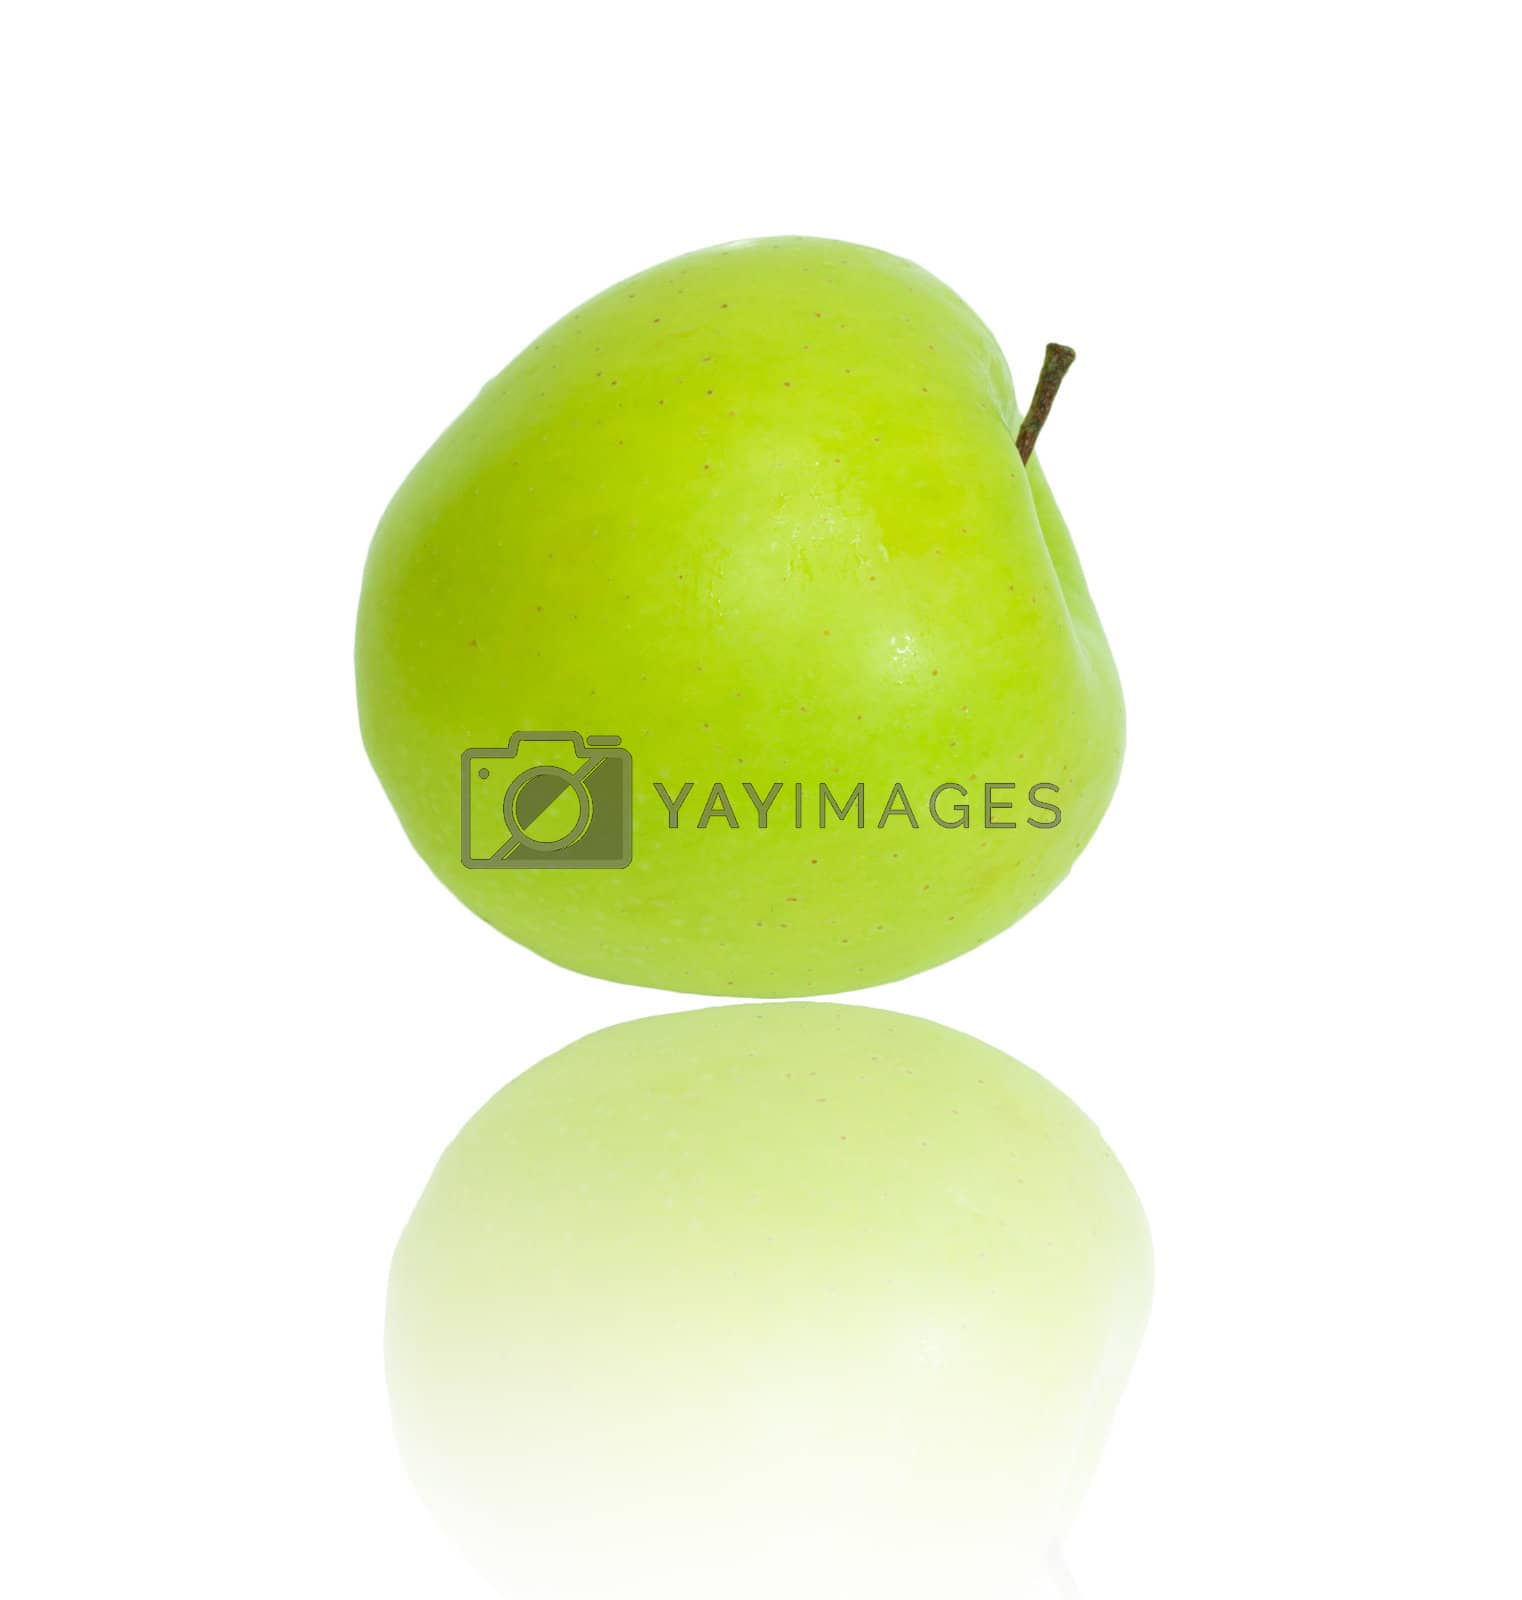 Royalty free image of A ripe green apple. Isolated on white  by schankz